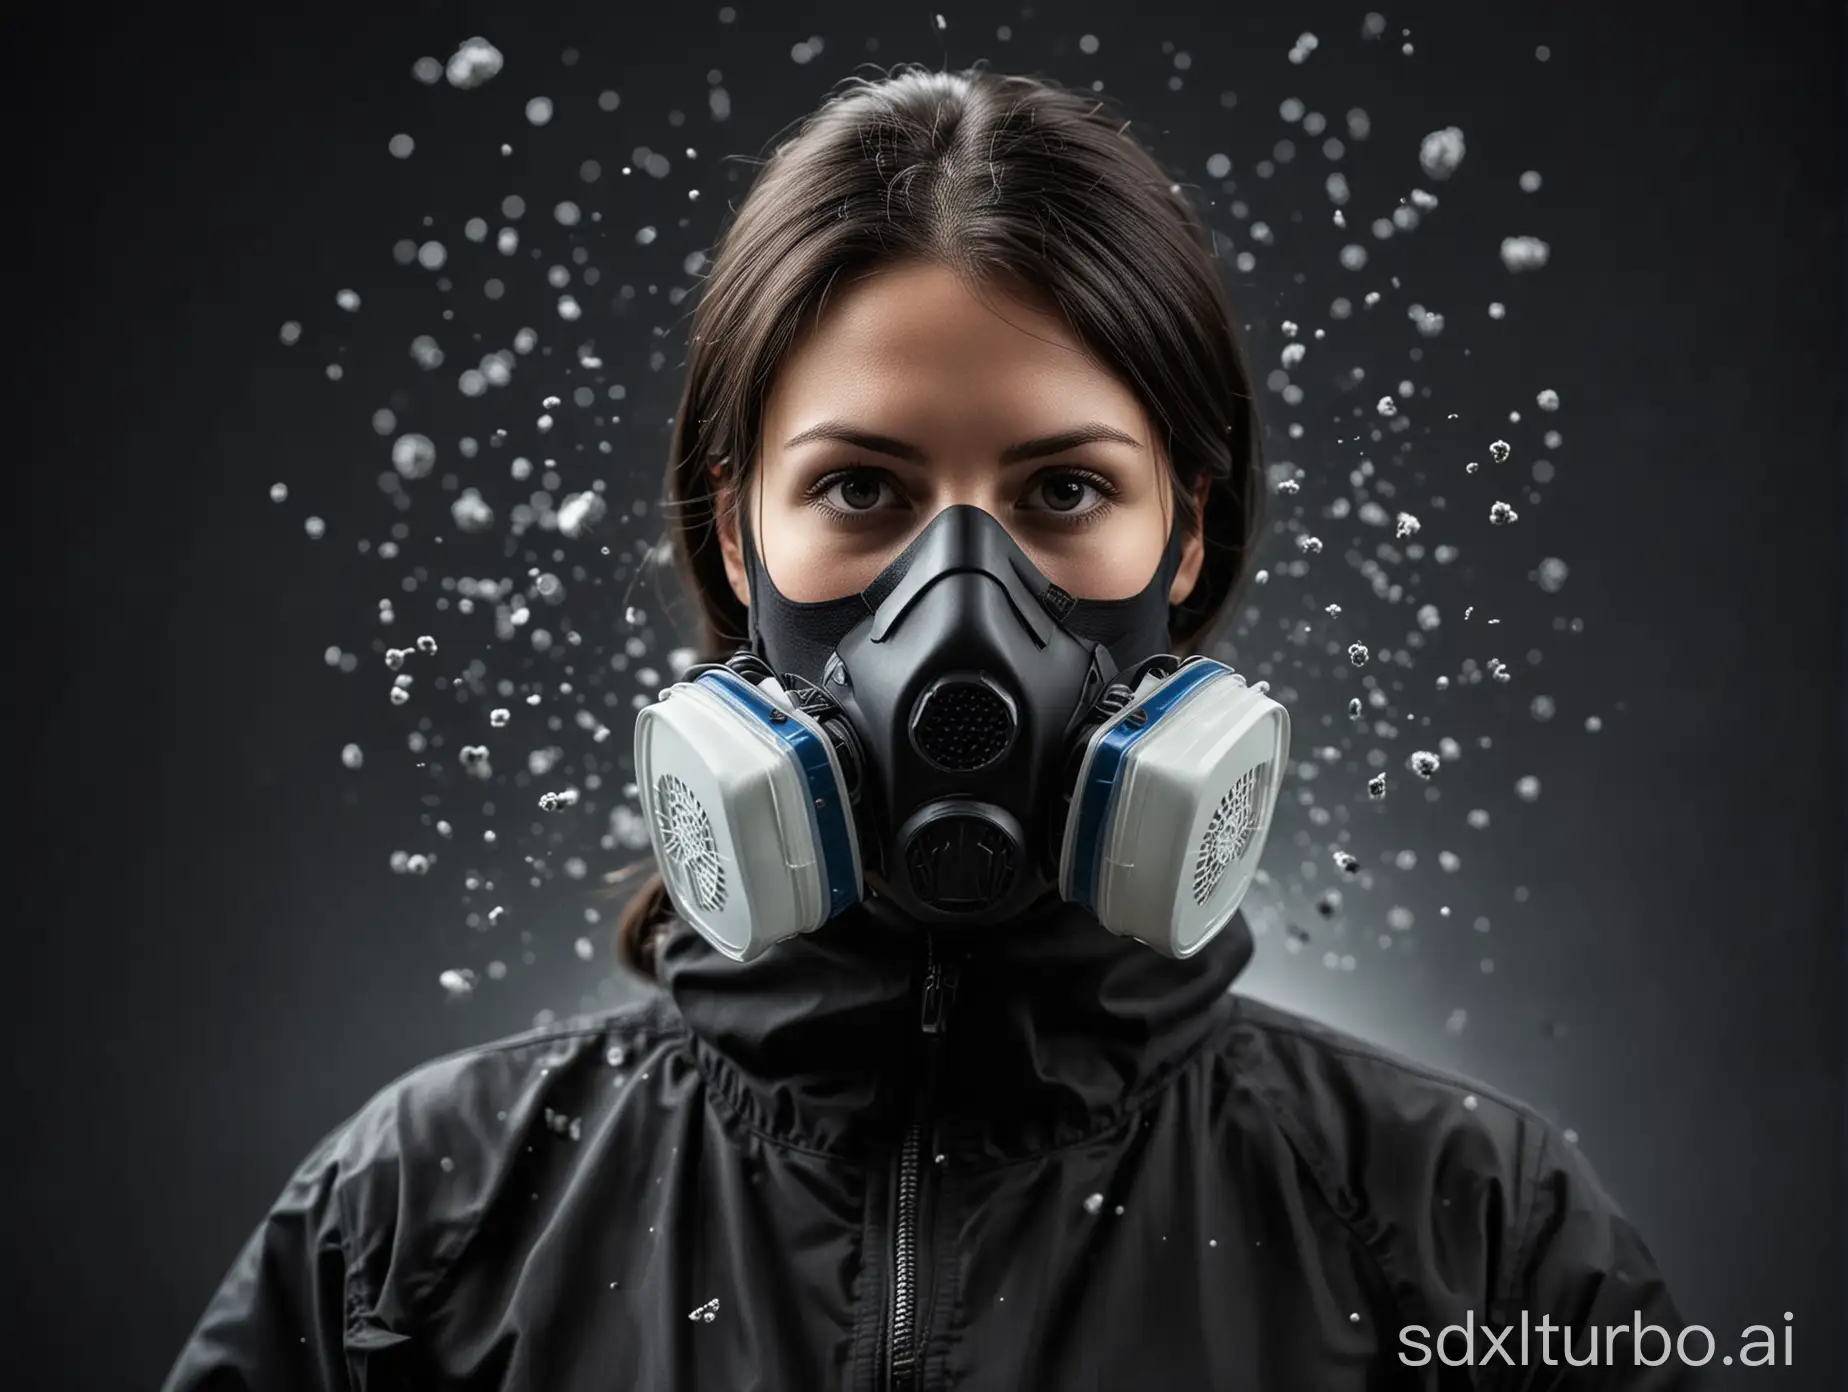 Person-Wearing-Black-Respirator-amidst-Airborne-Virus-Particles